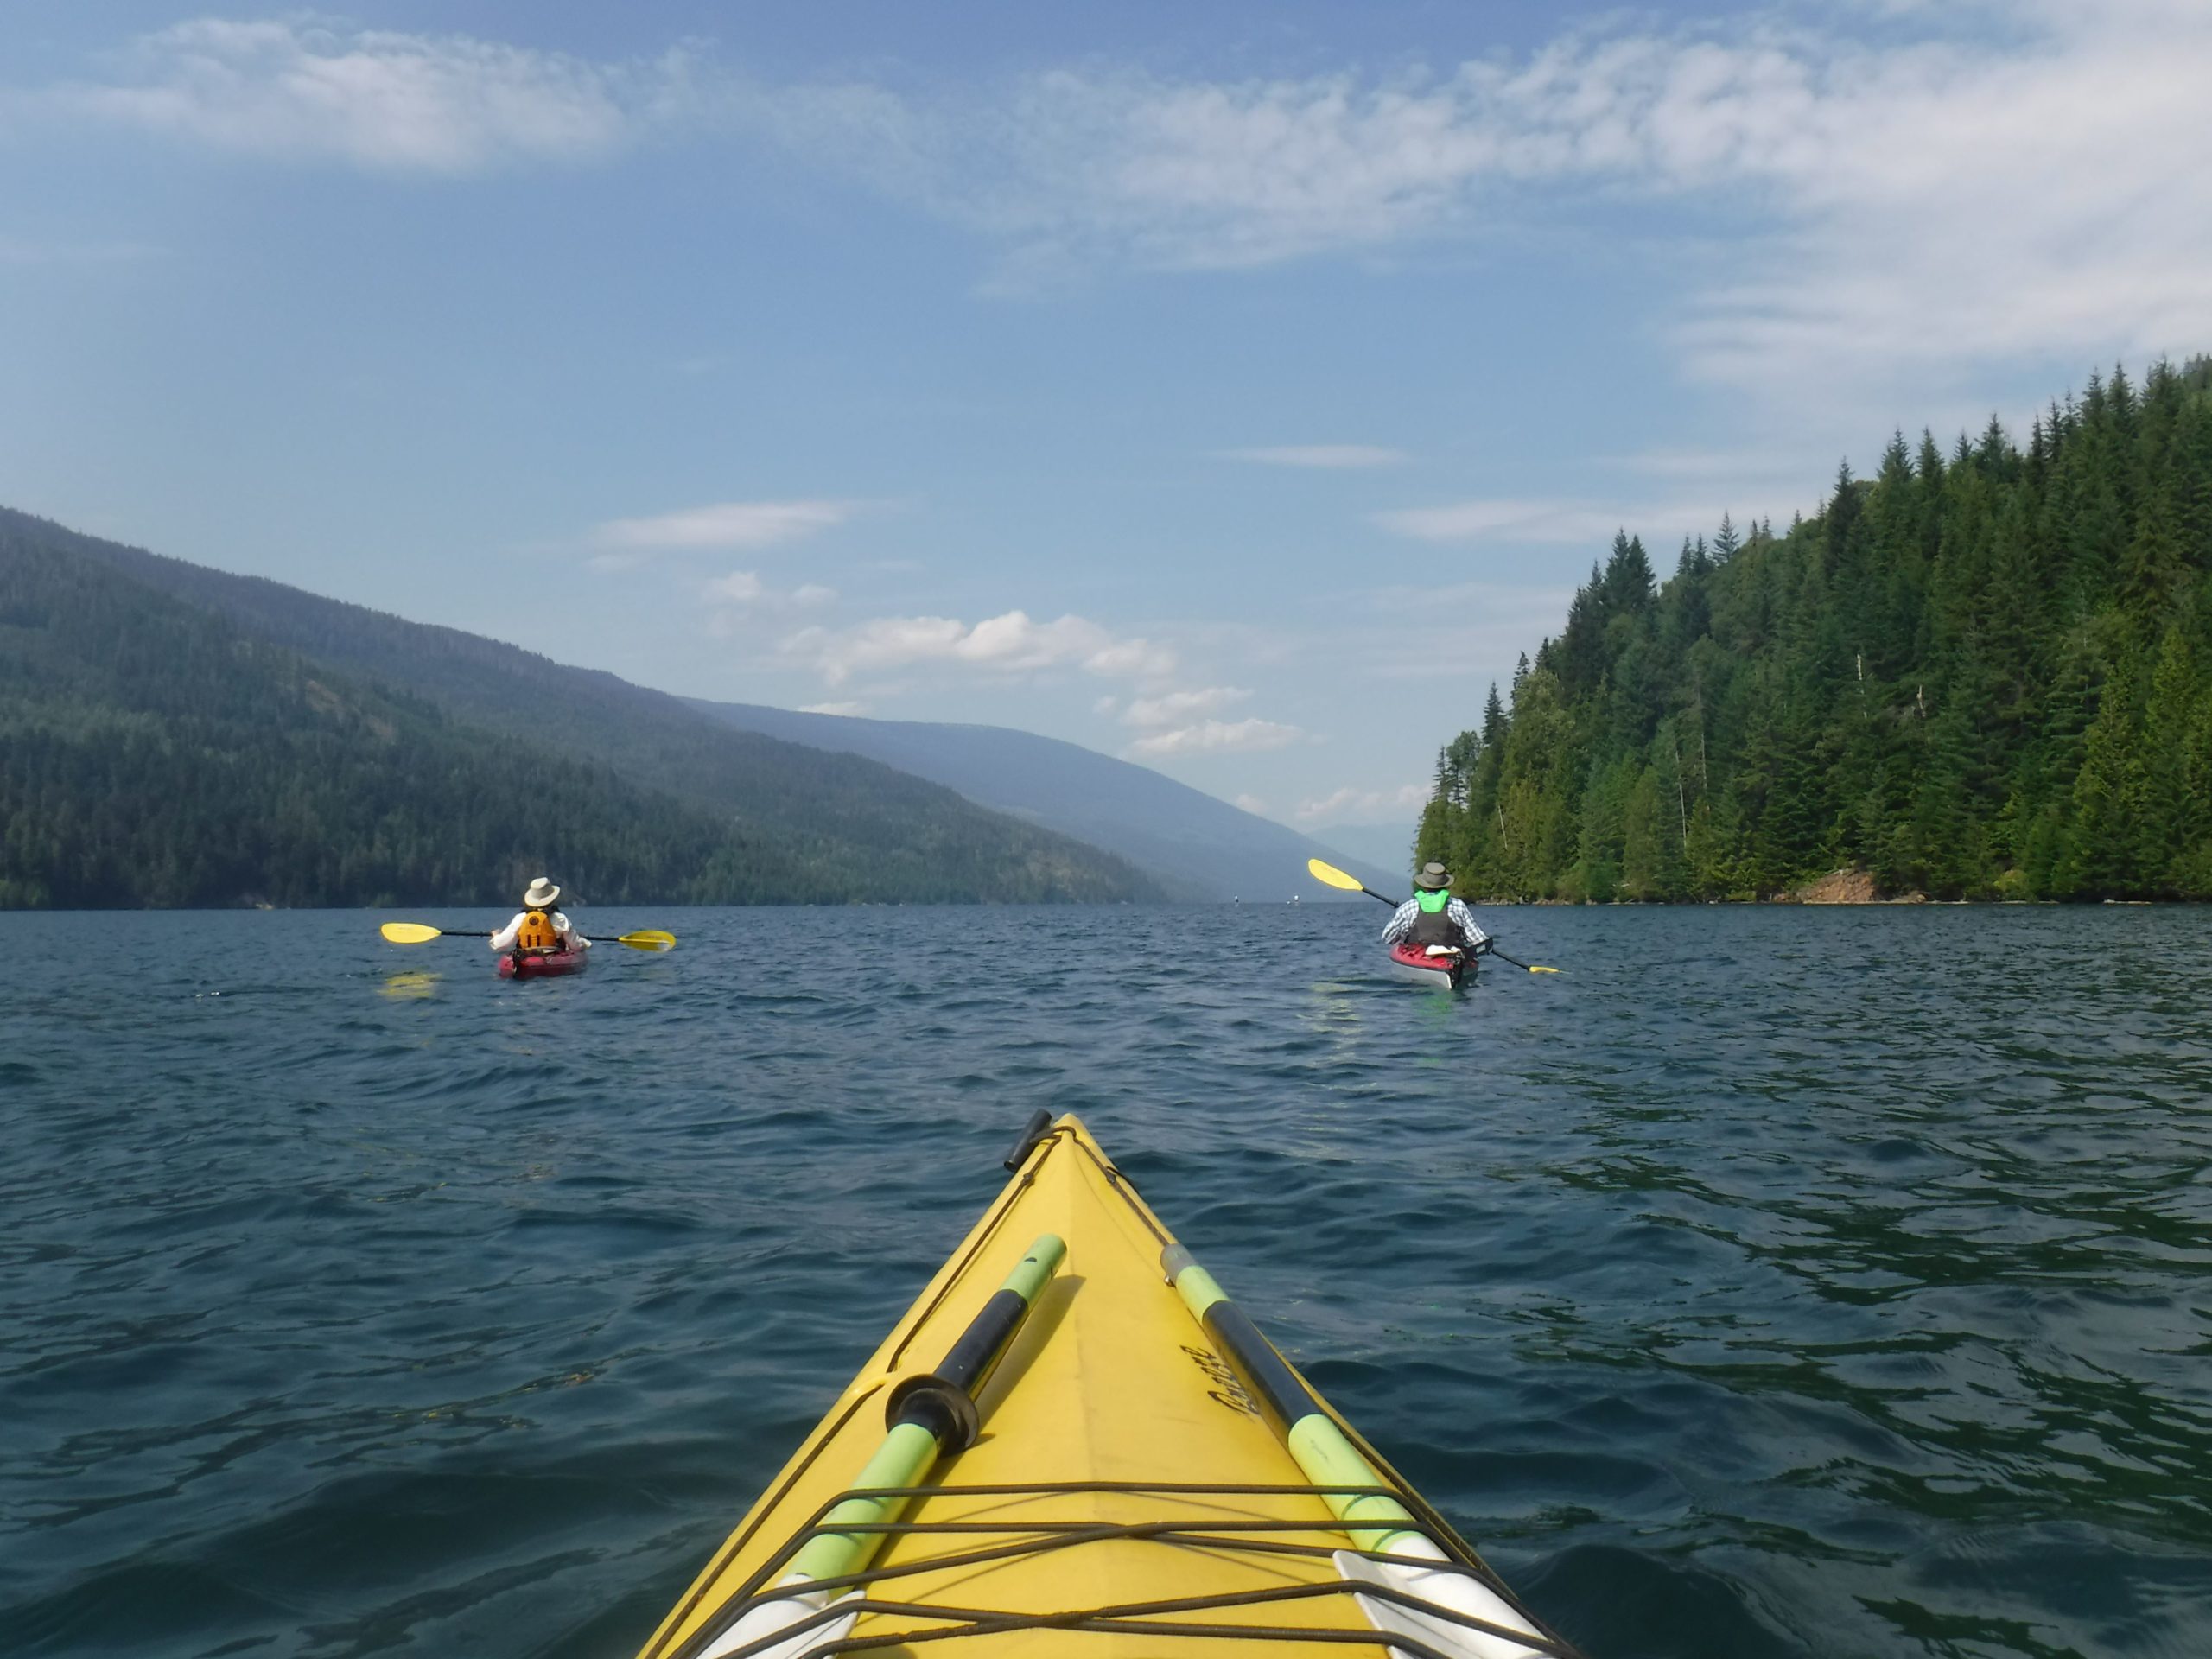 Kayaking in Revelstoke with my family.